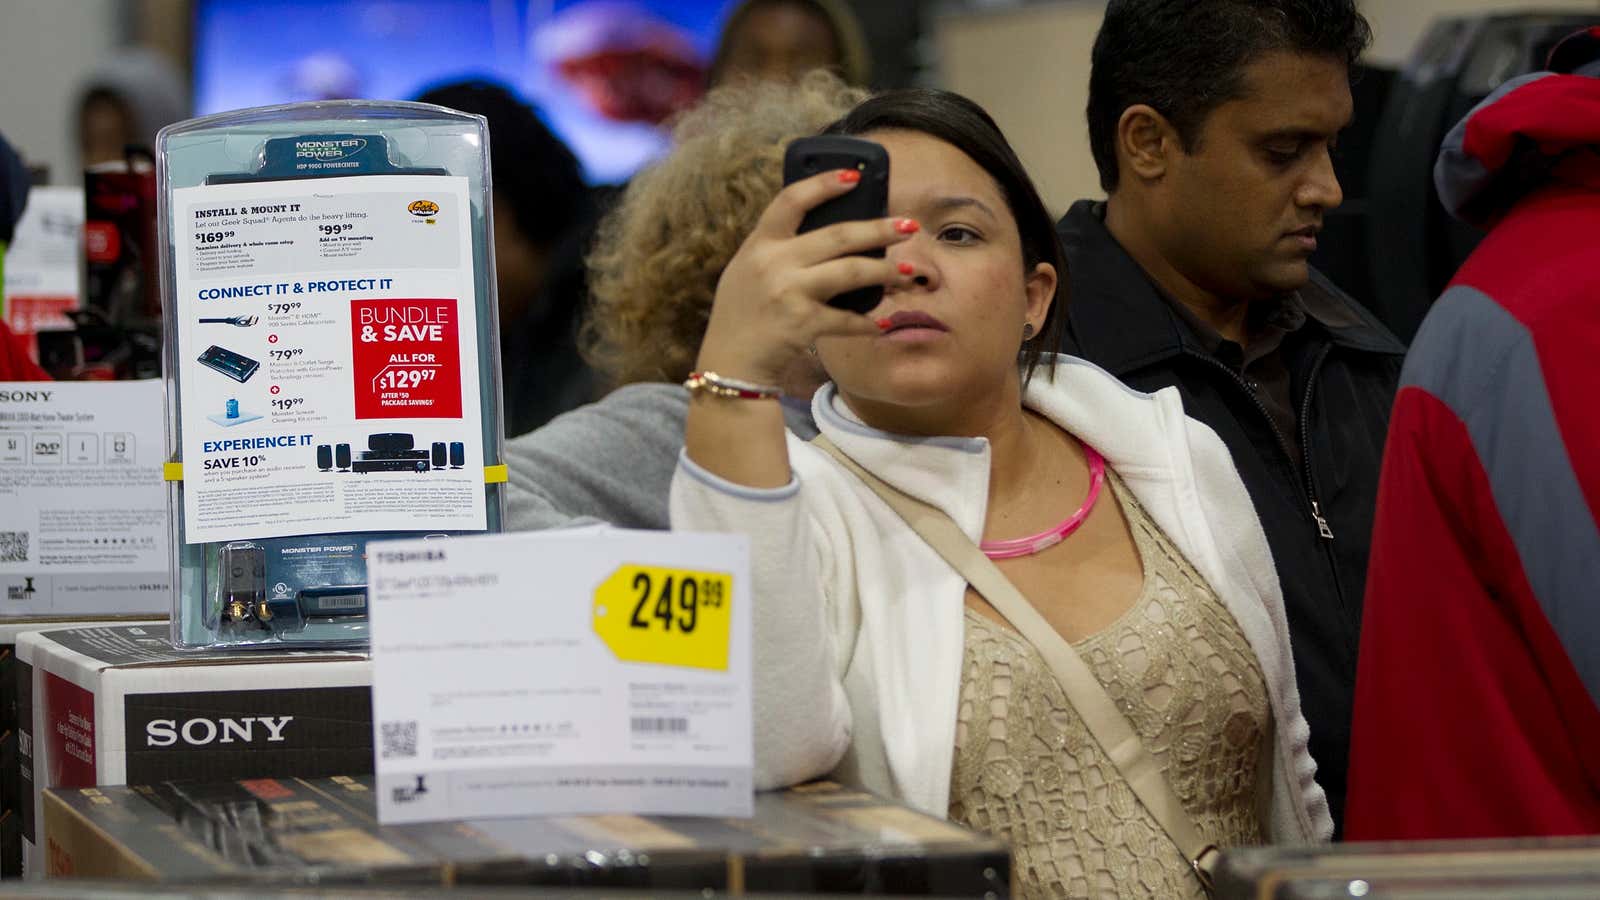 The new way to hunt for bargains in Best Buy.